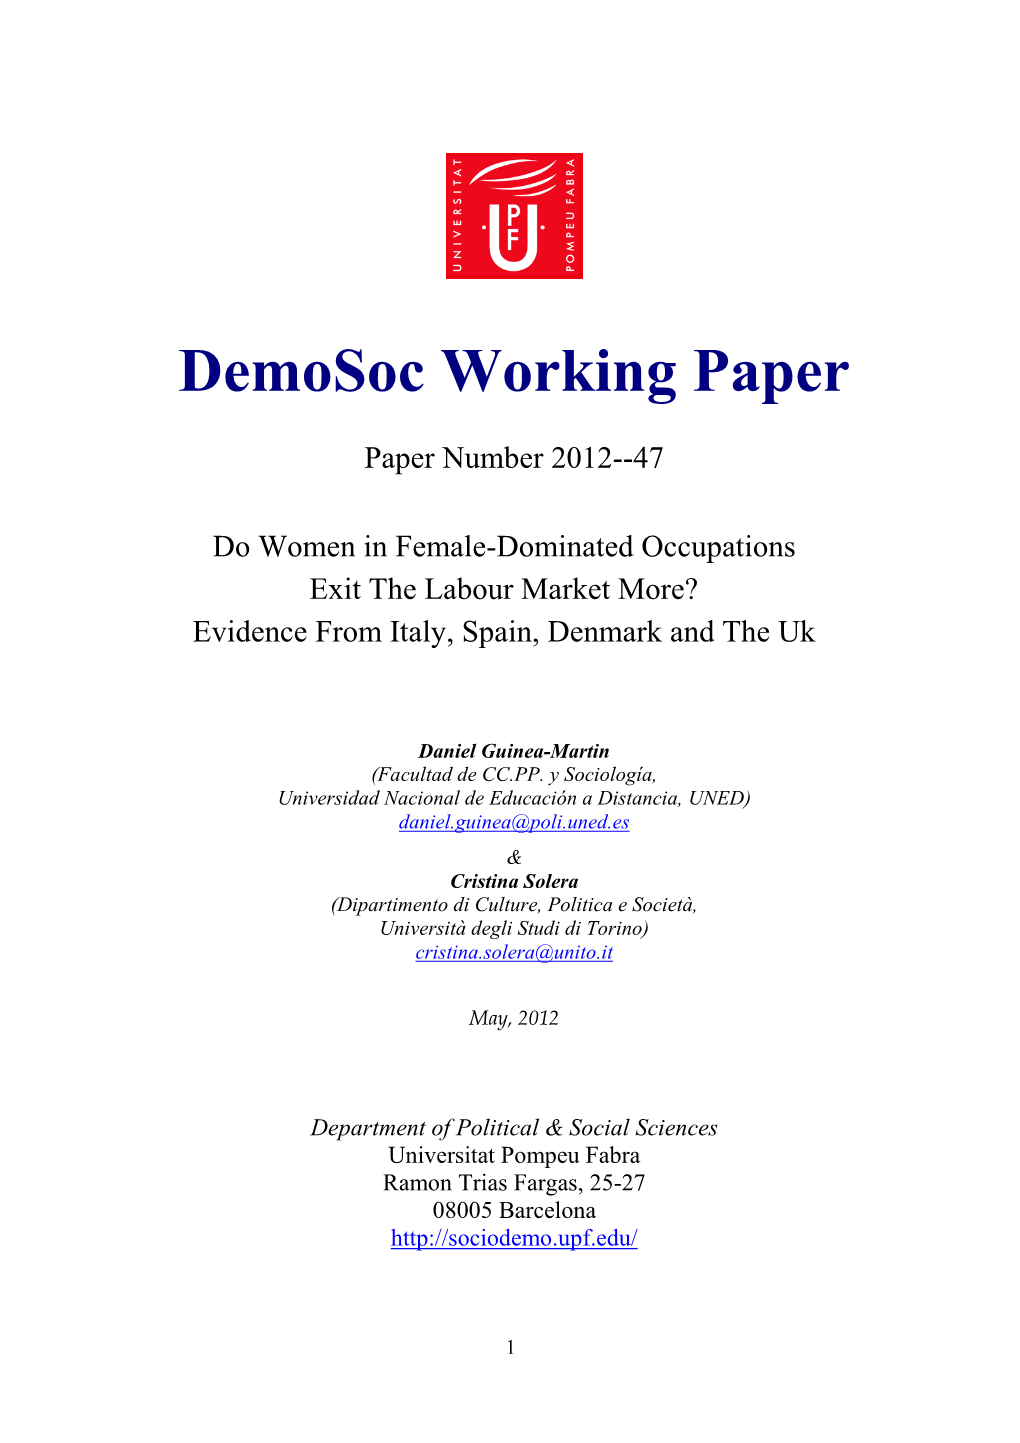 Do Women in Female-Dominated Occupations Exit the Labour Market More? Evidence from Italy, Spain, Denmark and the Uk